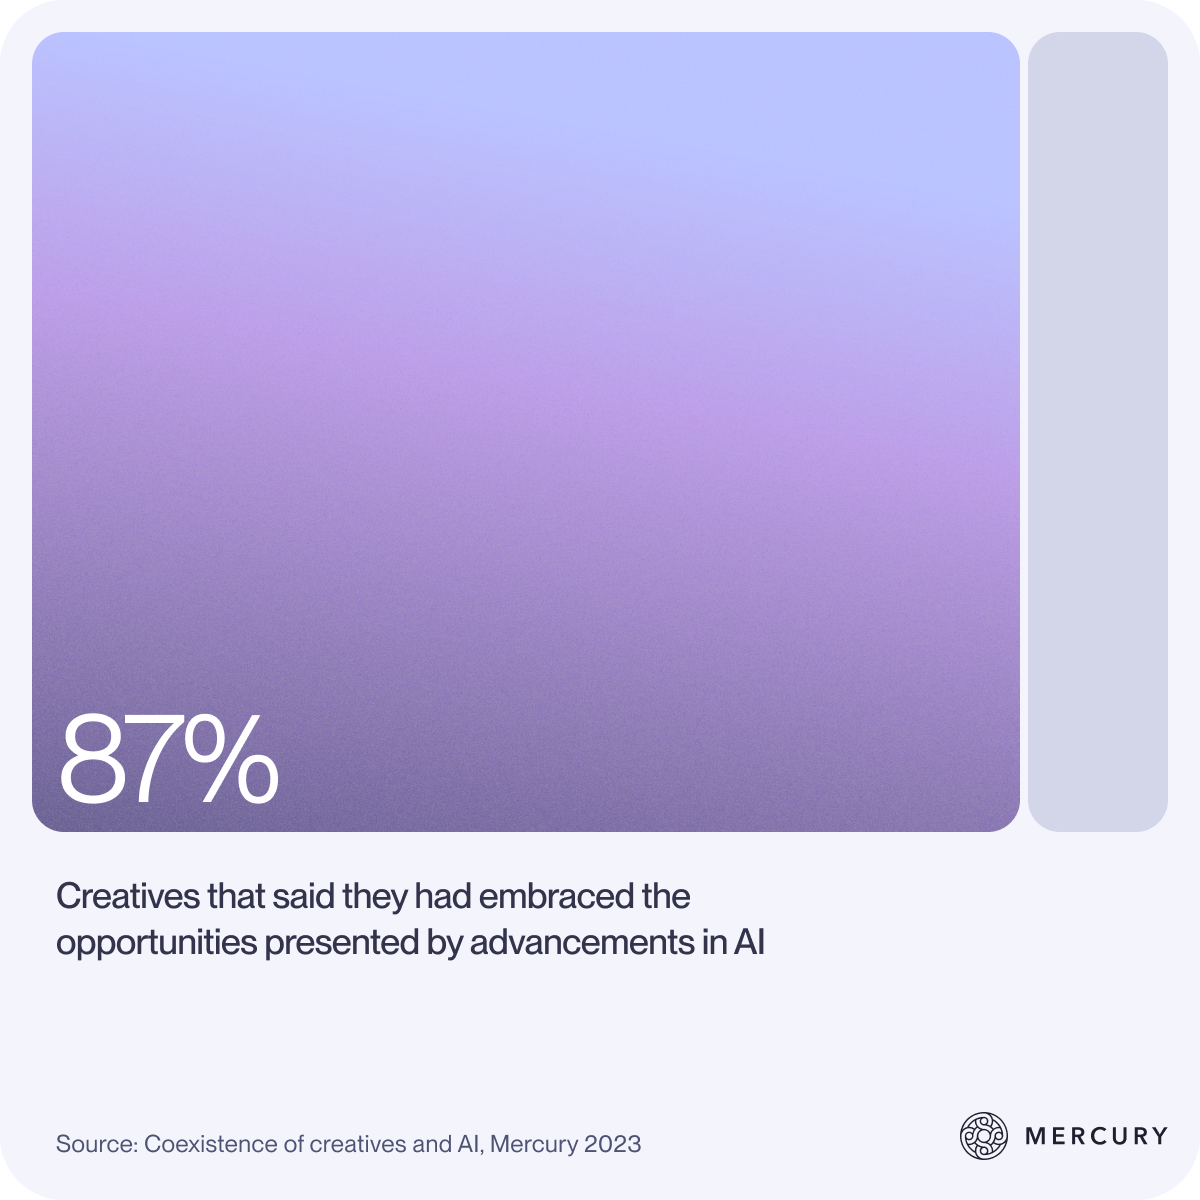 Bar chart showing that 87% of creatives said they embraced the opportunities presented by advancements in AI